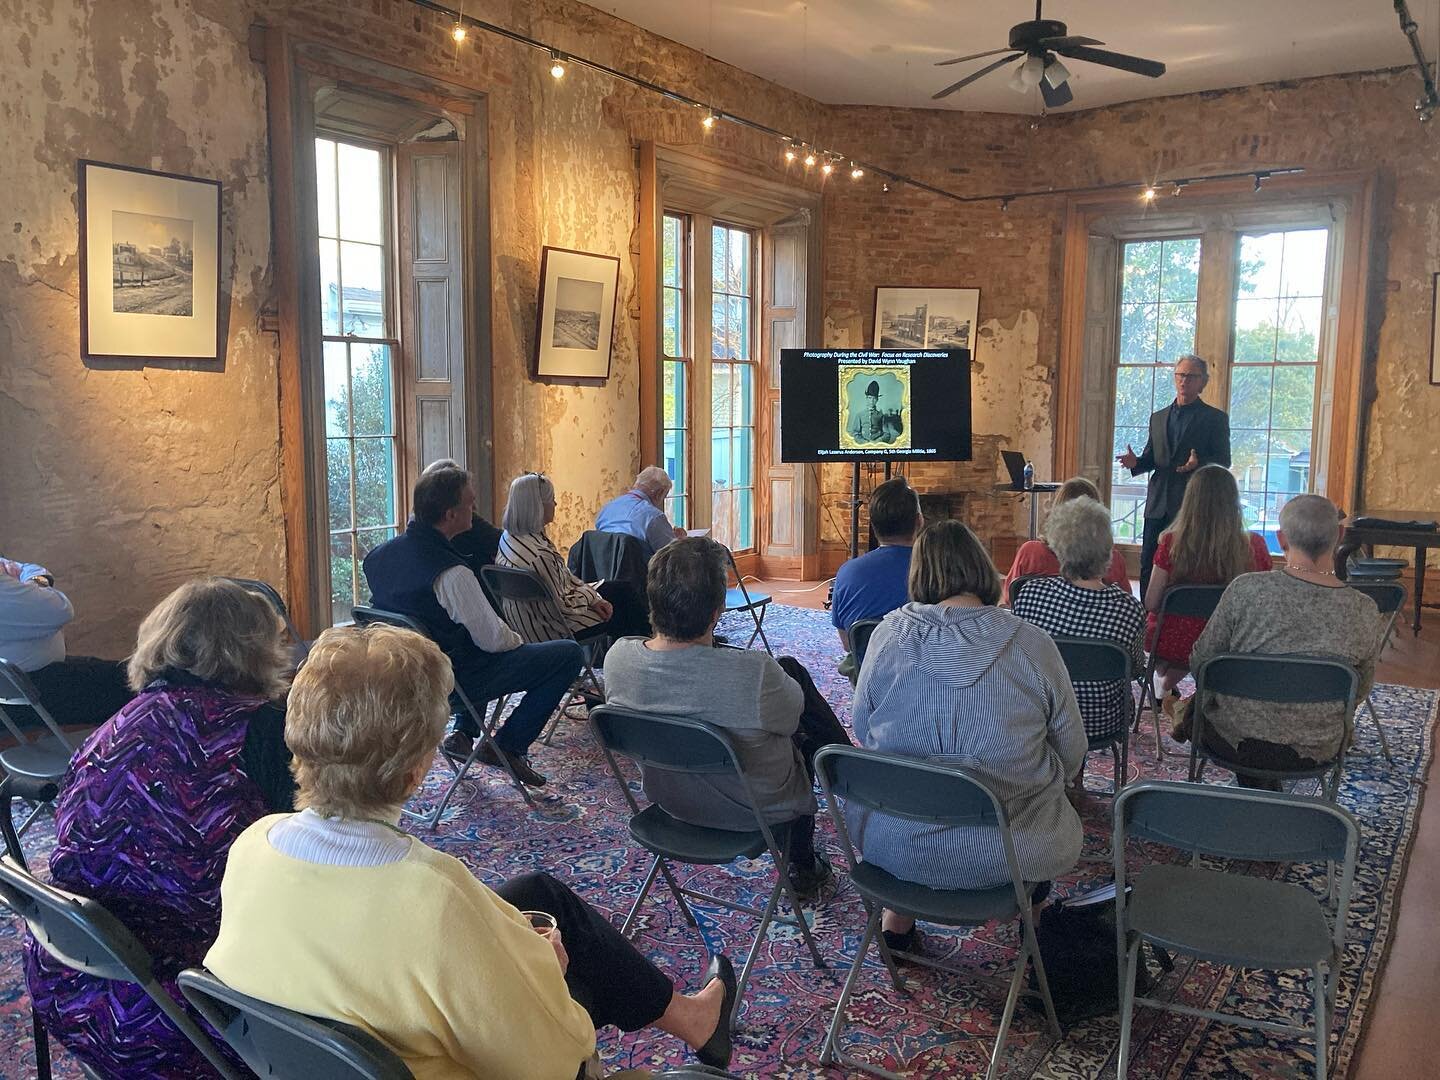 Phoenix Flies is back! One of my favorite Atlanta experiences, #PhoenixFlies celebrates the city&rsquo;s historic sites with free tours and educational programs all month long. 
.
I attended my first PF event this week; it was on Southern photography